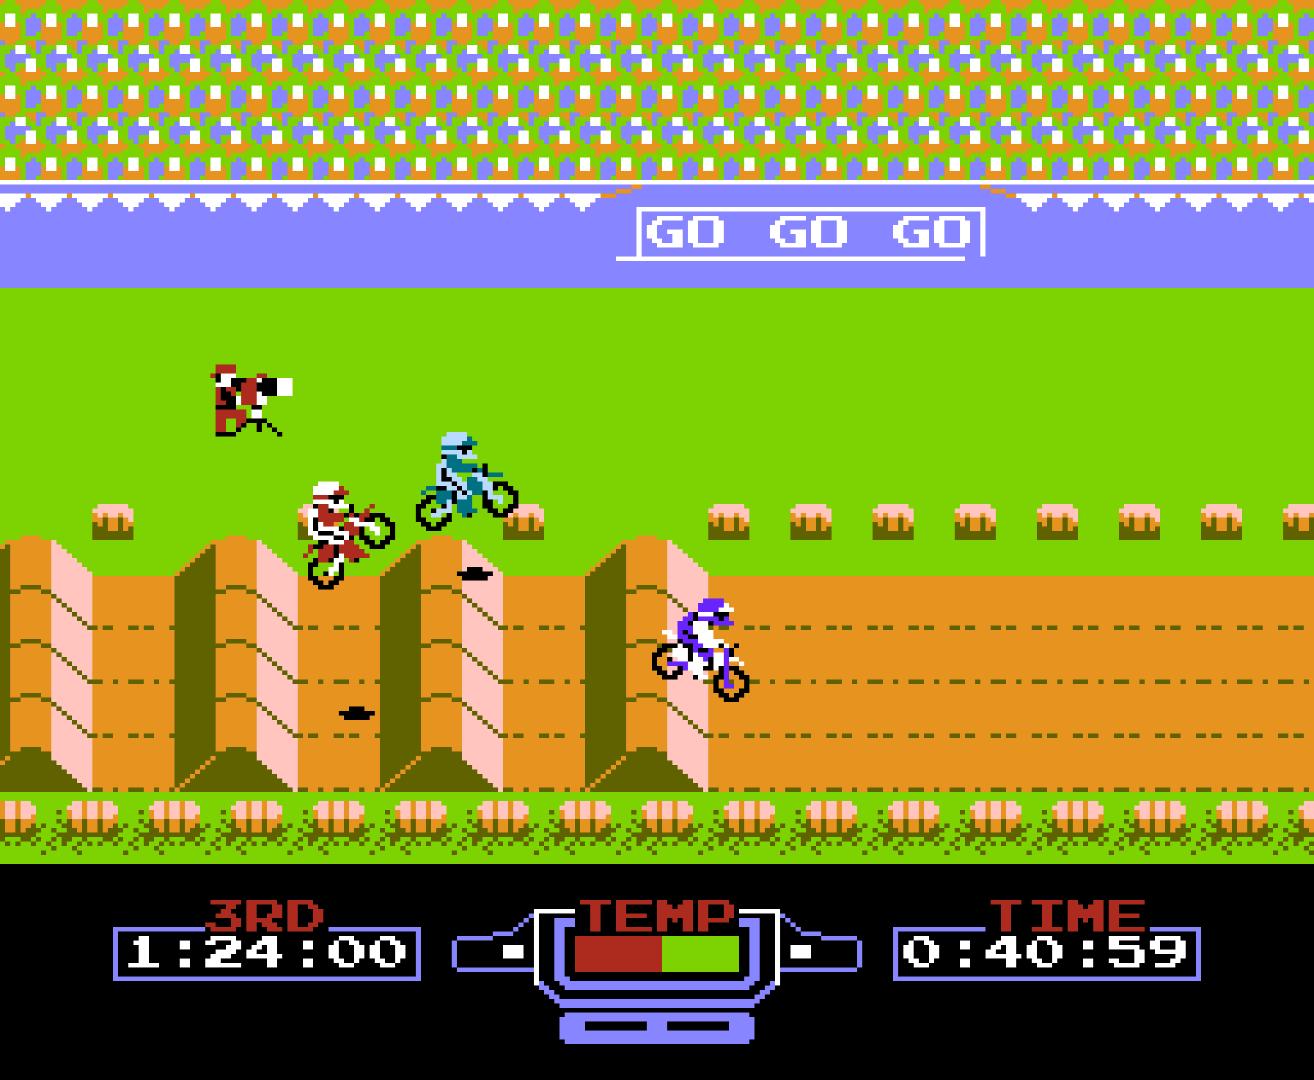 90s kids games | Childhood games from the 90s: Excite Bike